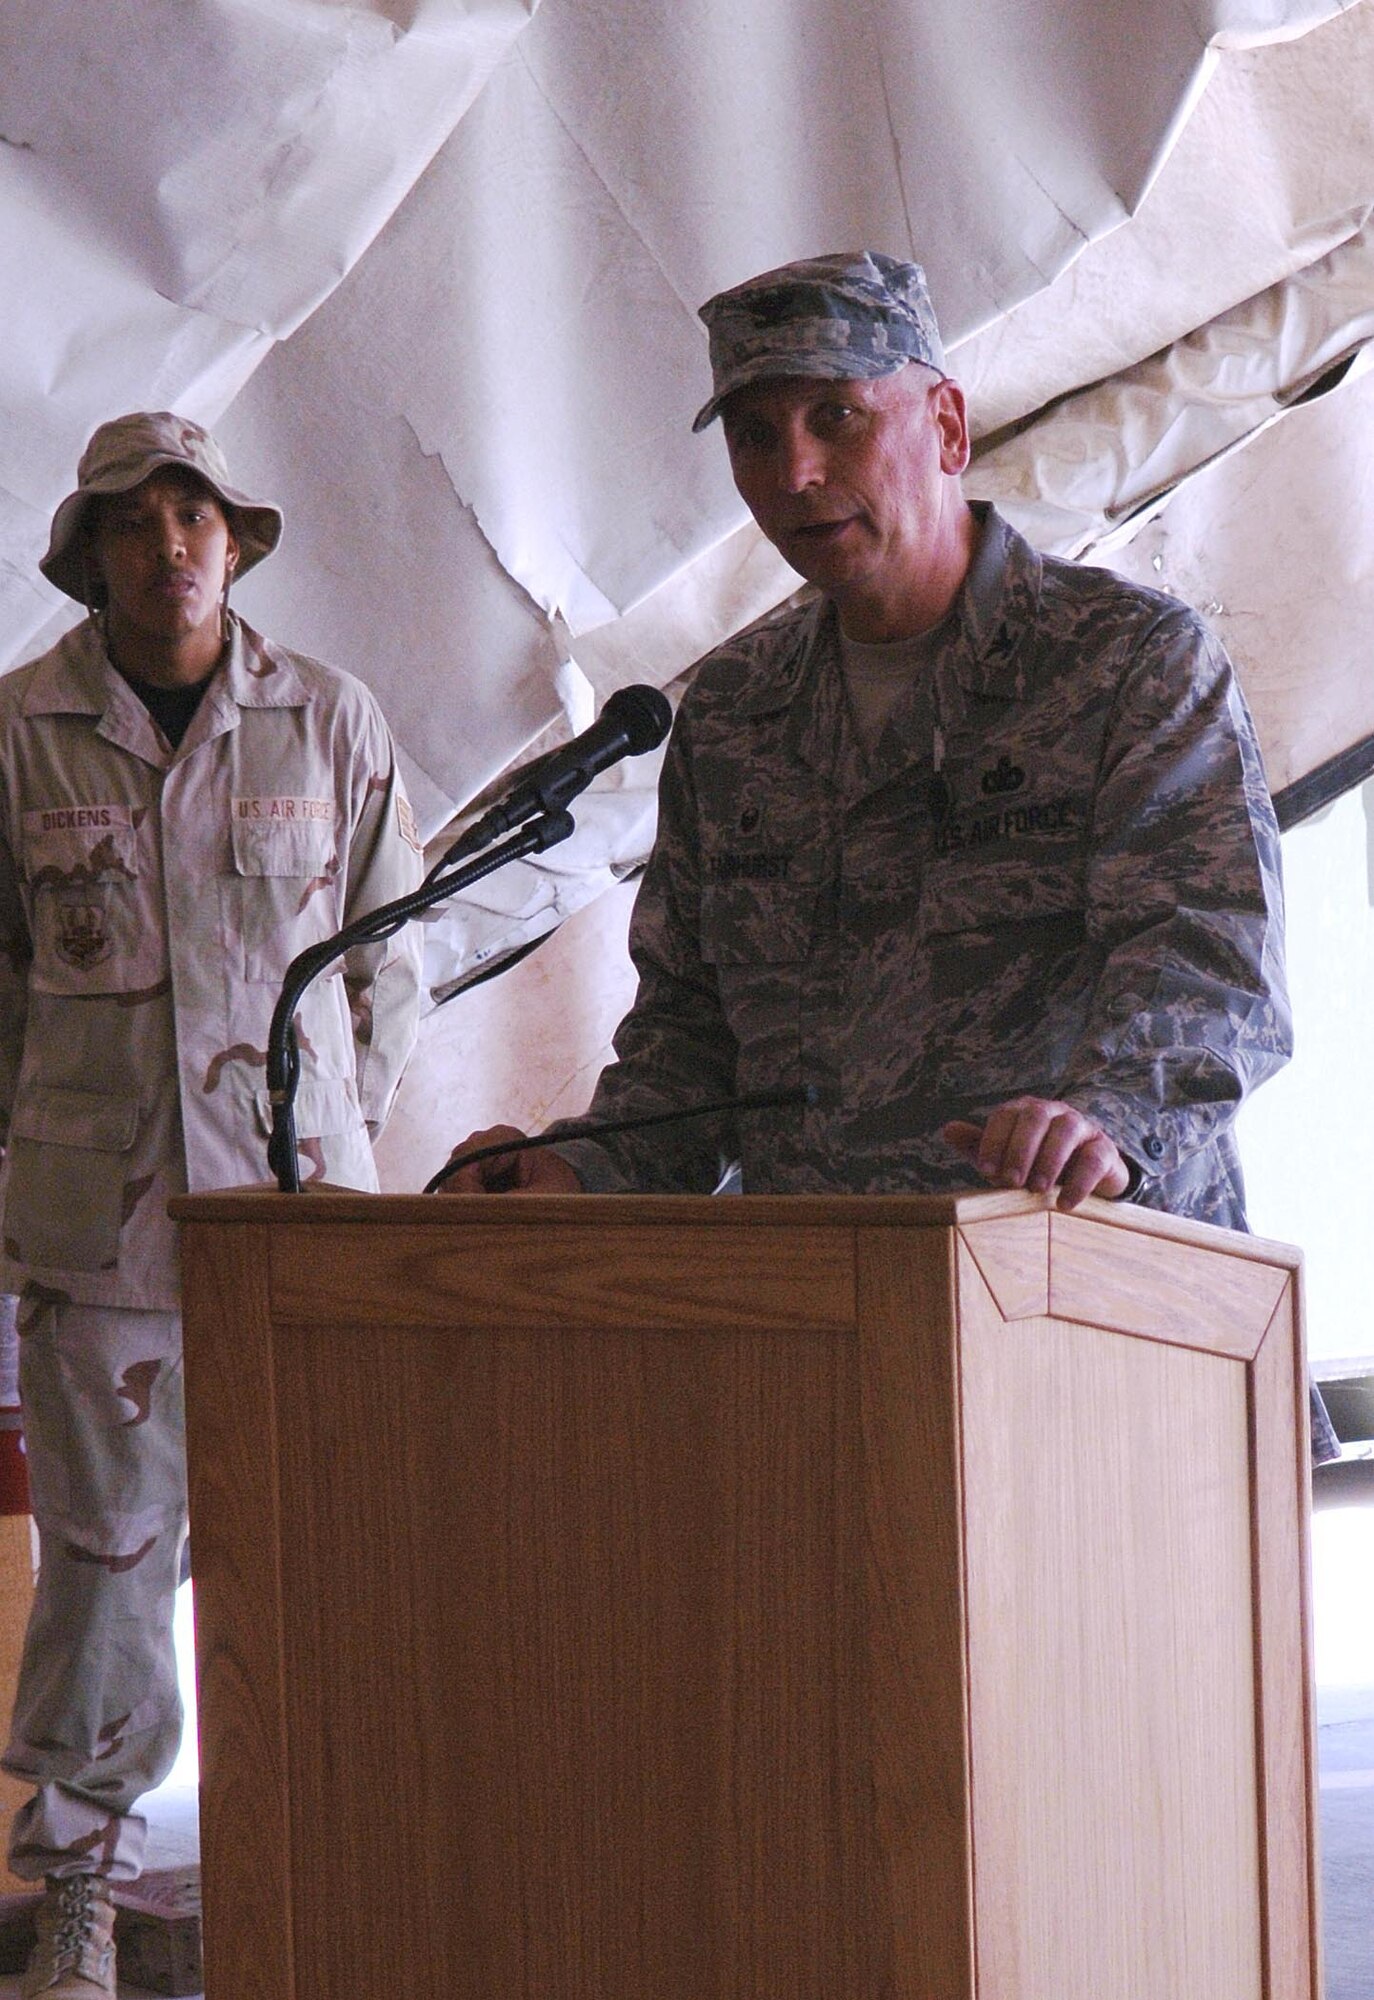 Col. Fred Fairhurst, 455th Air Expeditionary Group commander, speaks to the audience at a change of command ceremony after receiving command of the group at Bagram Airfield, Afghanistan. (U.S. Air Force photo by Staff Sgt. Craig Seals)